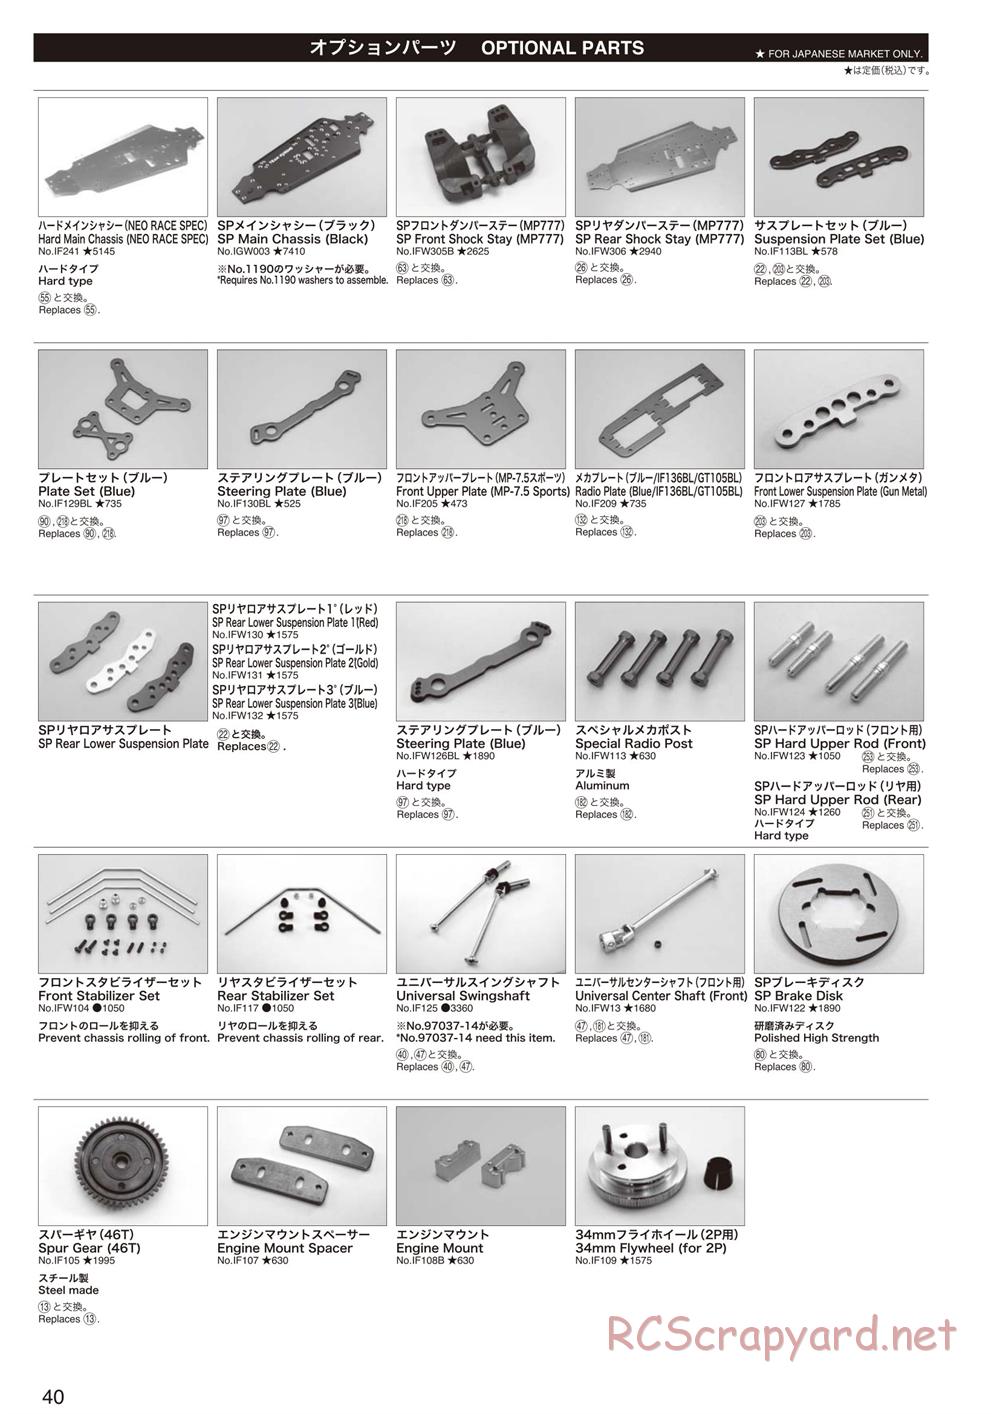 Kyosho - Inferno Neo 2.0 - Parts List - Page 3